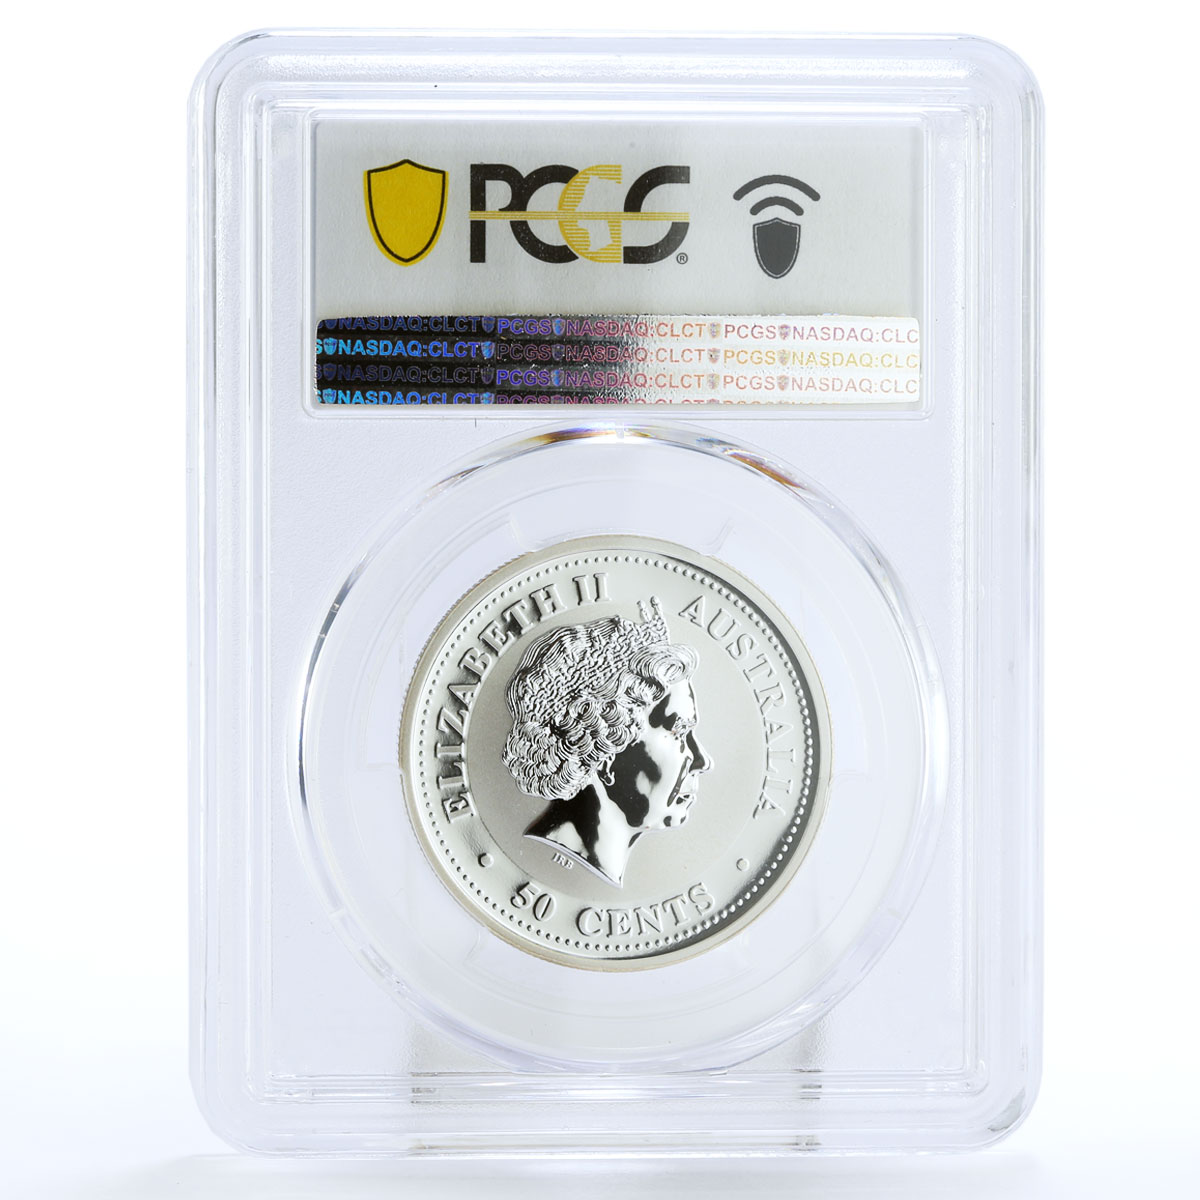 Australia 50 cent Year of the Horse MS68 PCGS silver coin 1/2 oz 2002